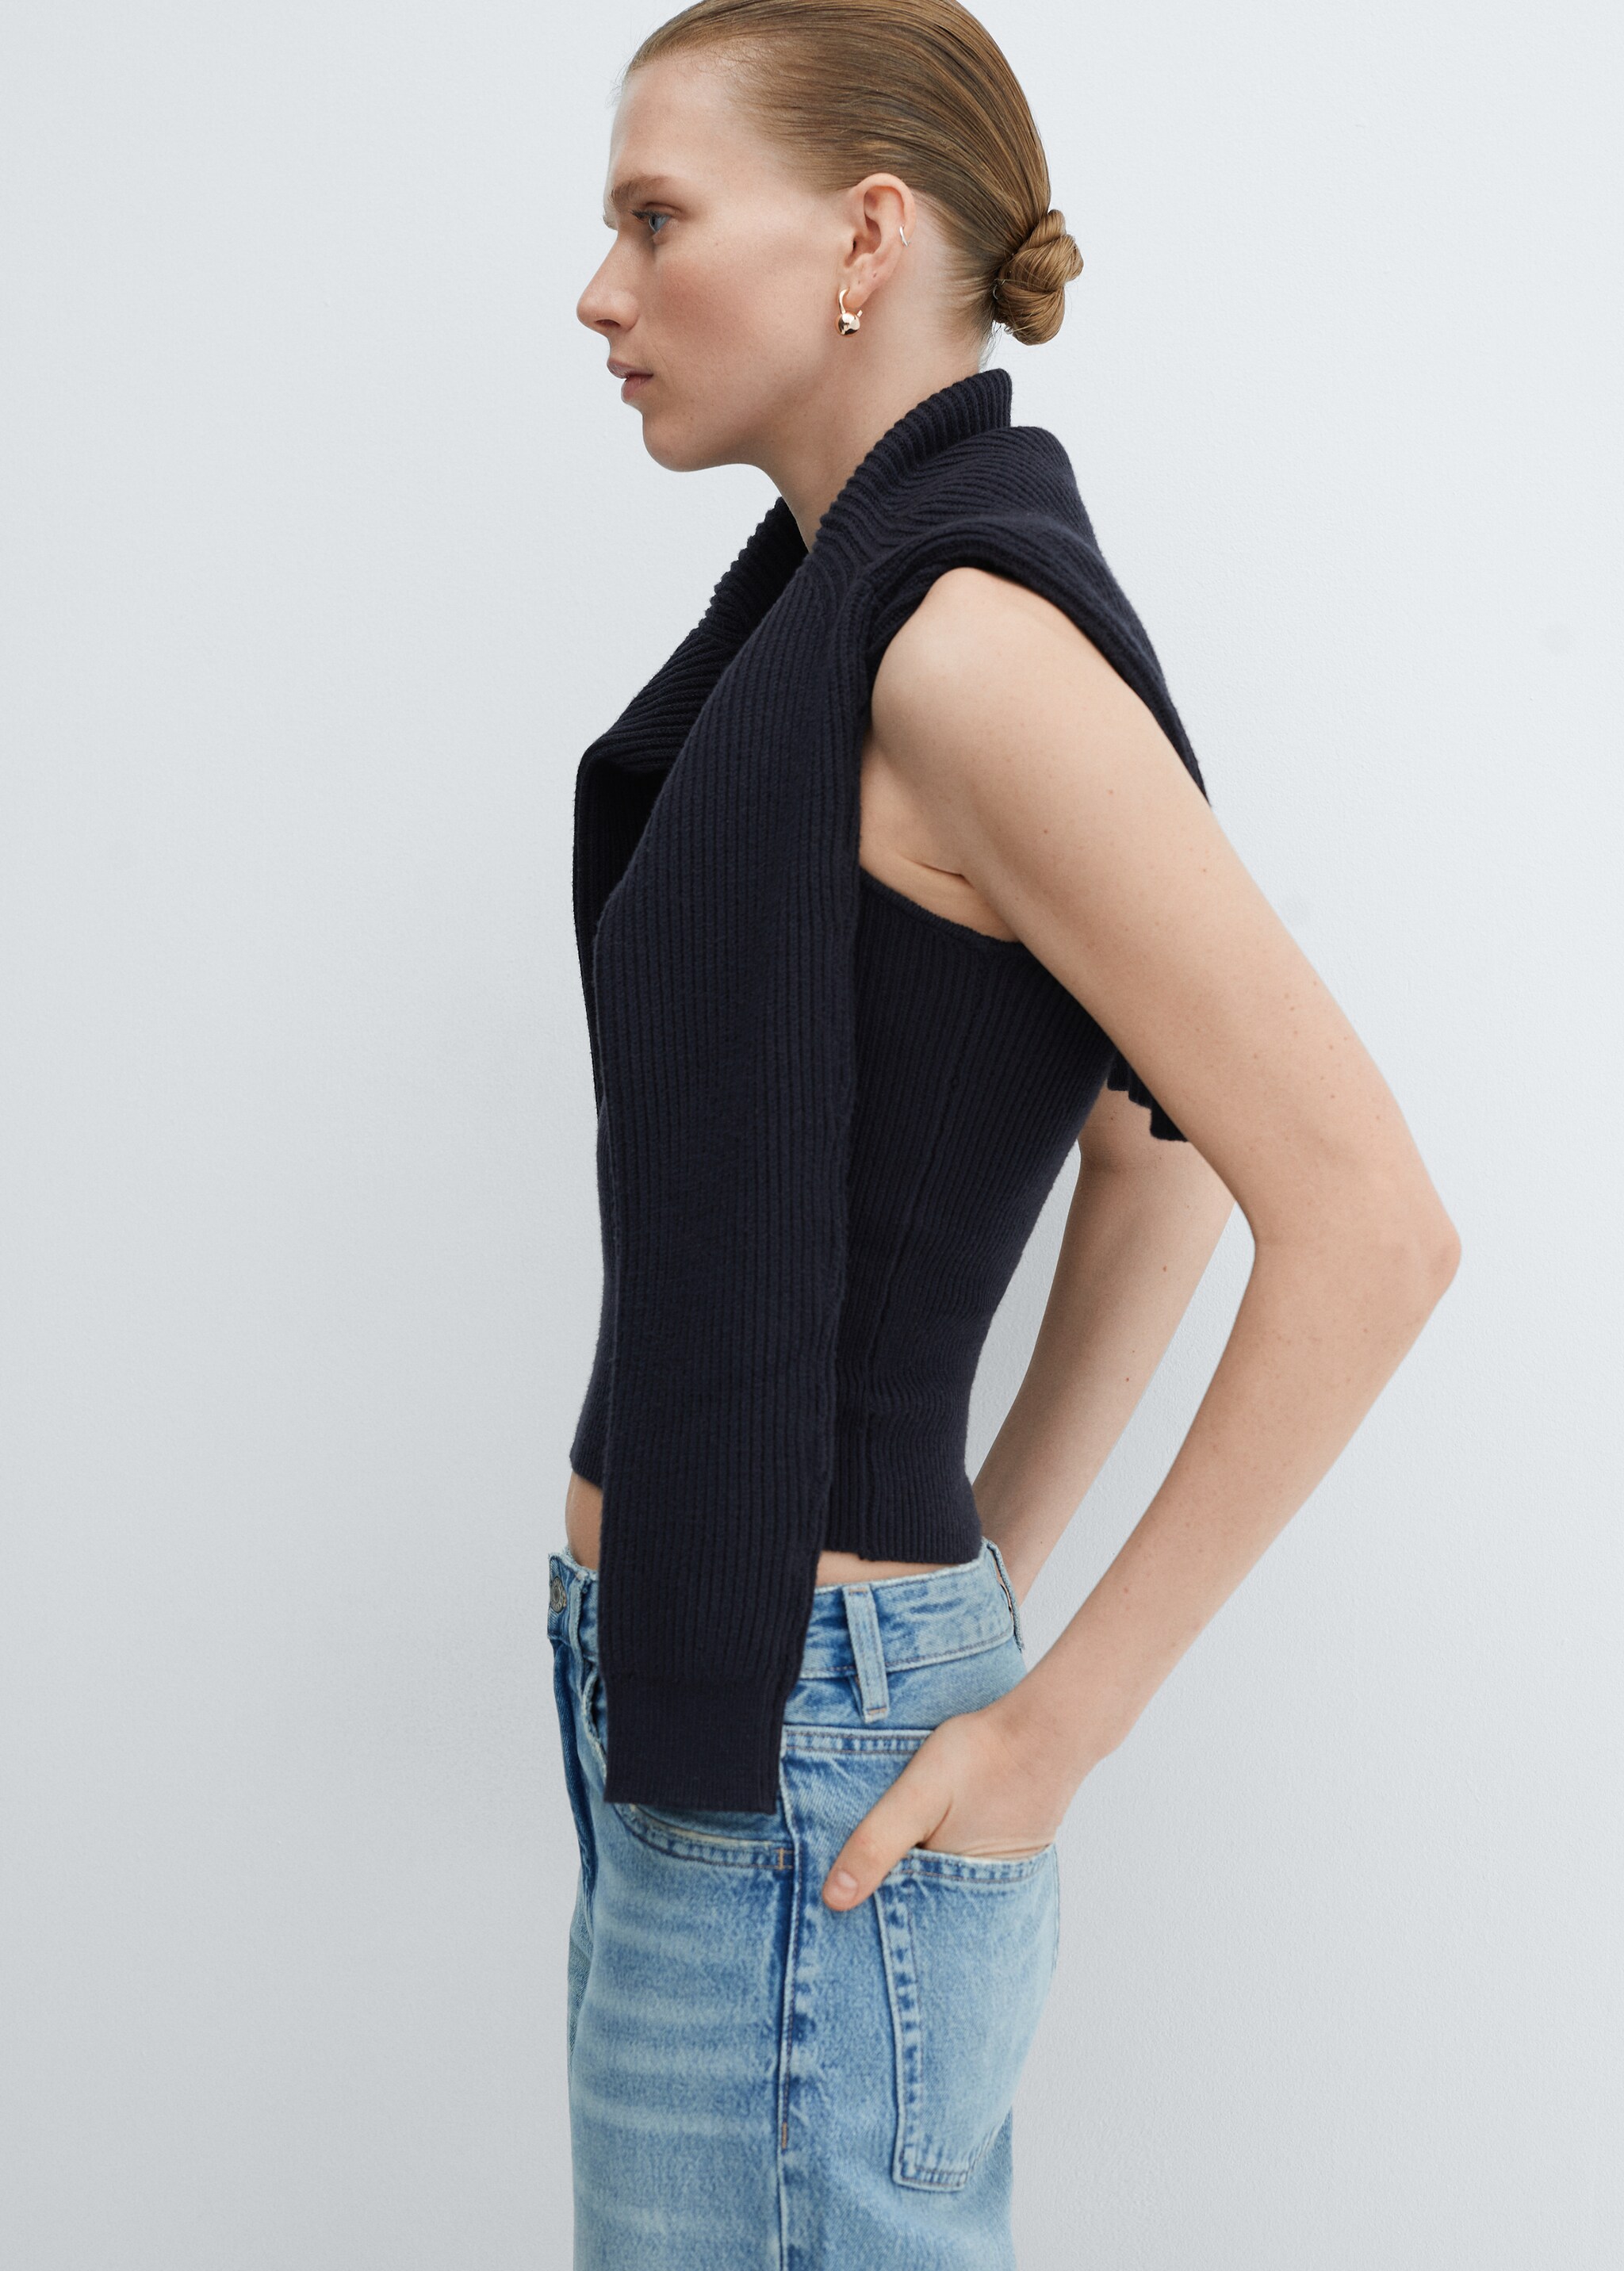 Ribbed knit top - Details of the article 4